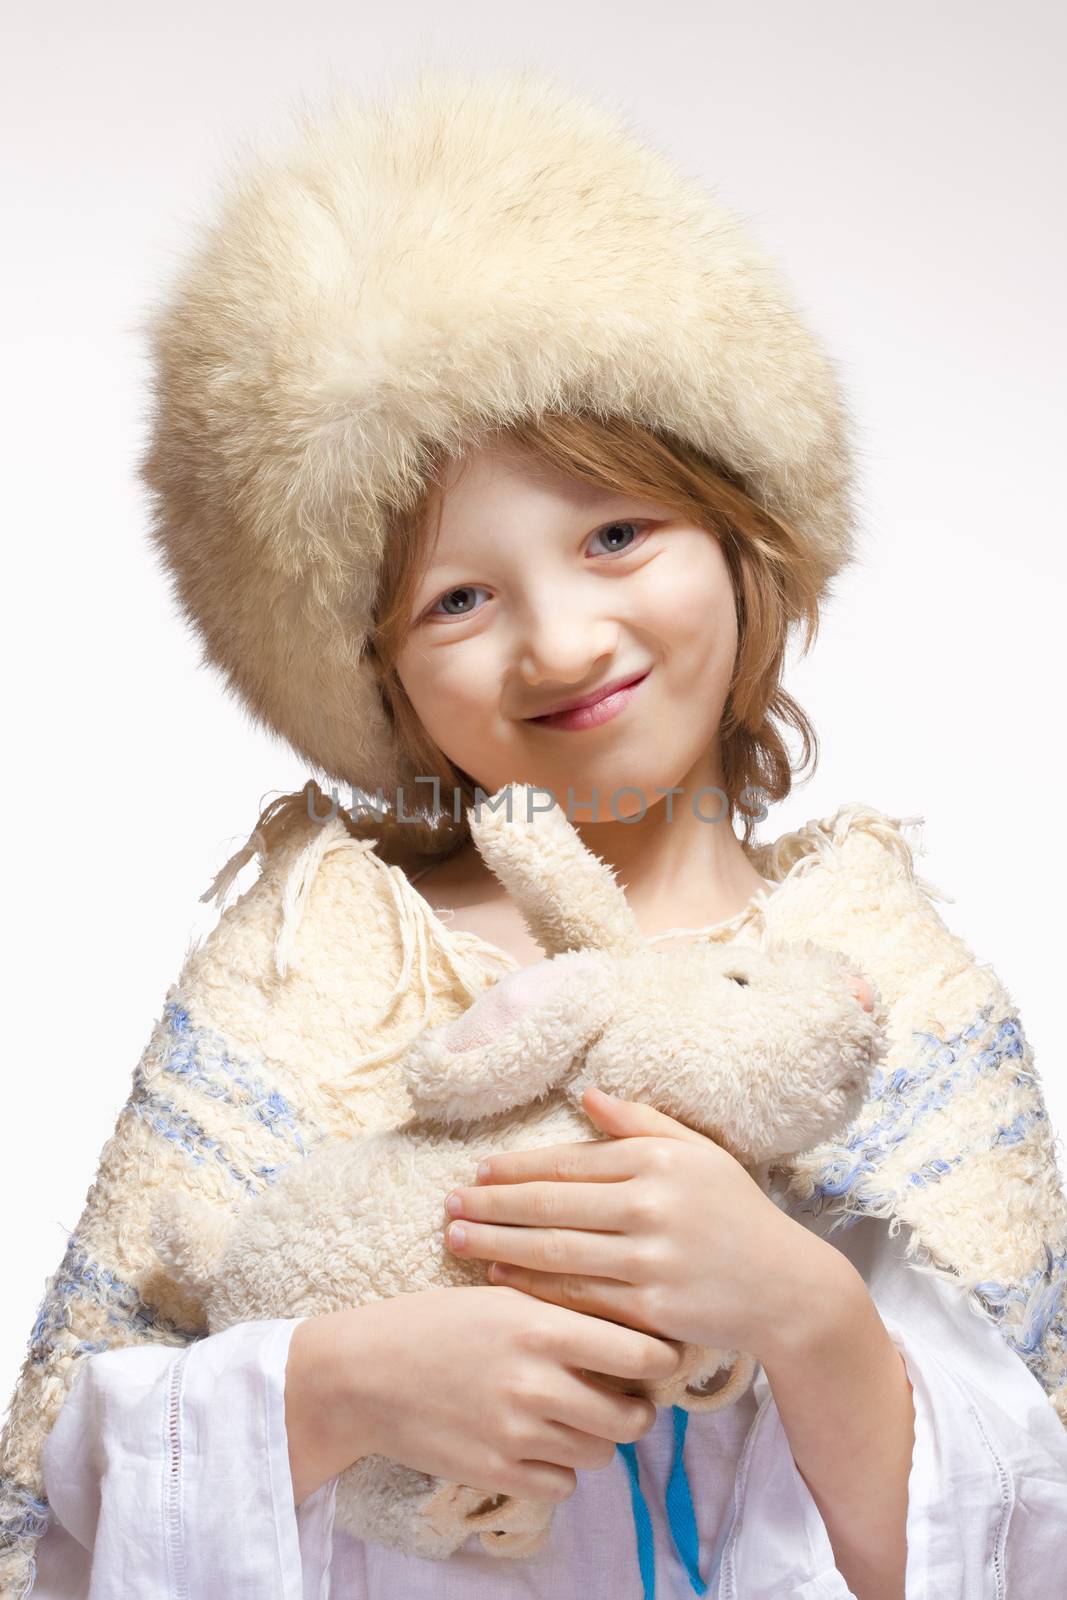 Portrait of a Boy with Fluffy Hat and Stuffed Animal by courtyardpix